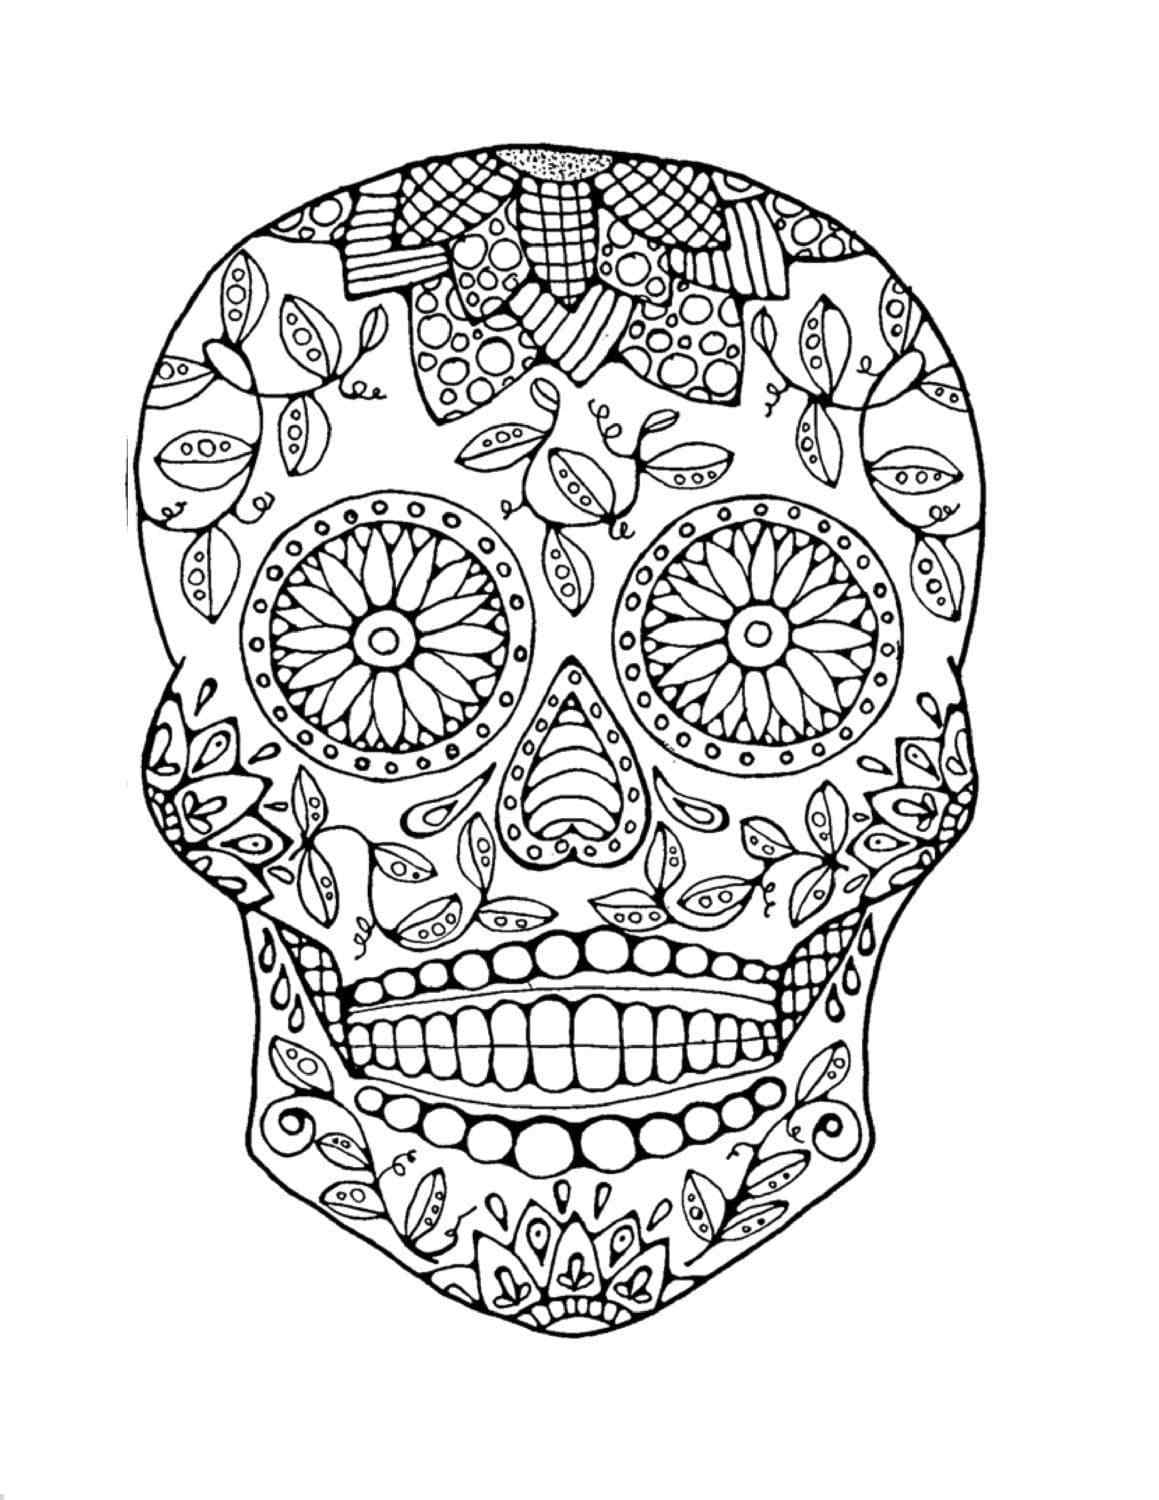 Patterned Drawing Of The Skull